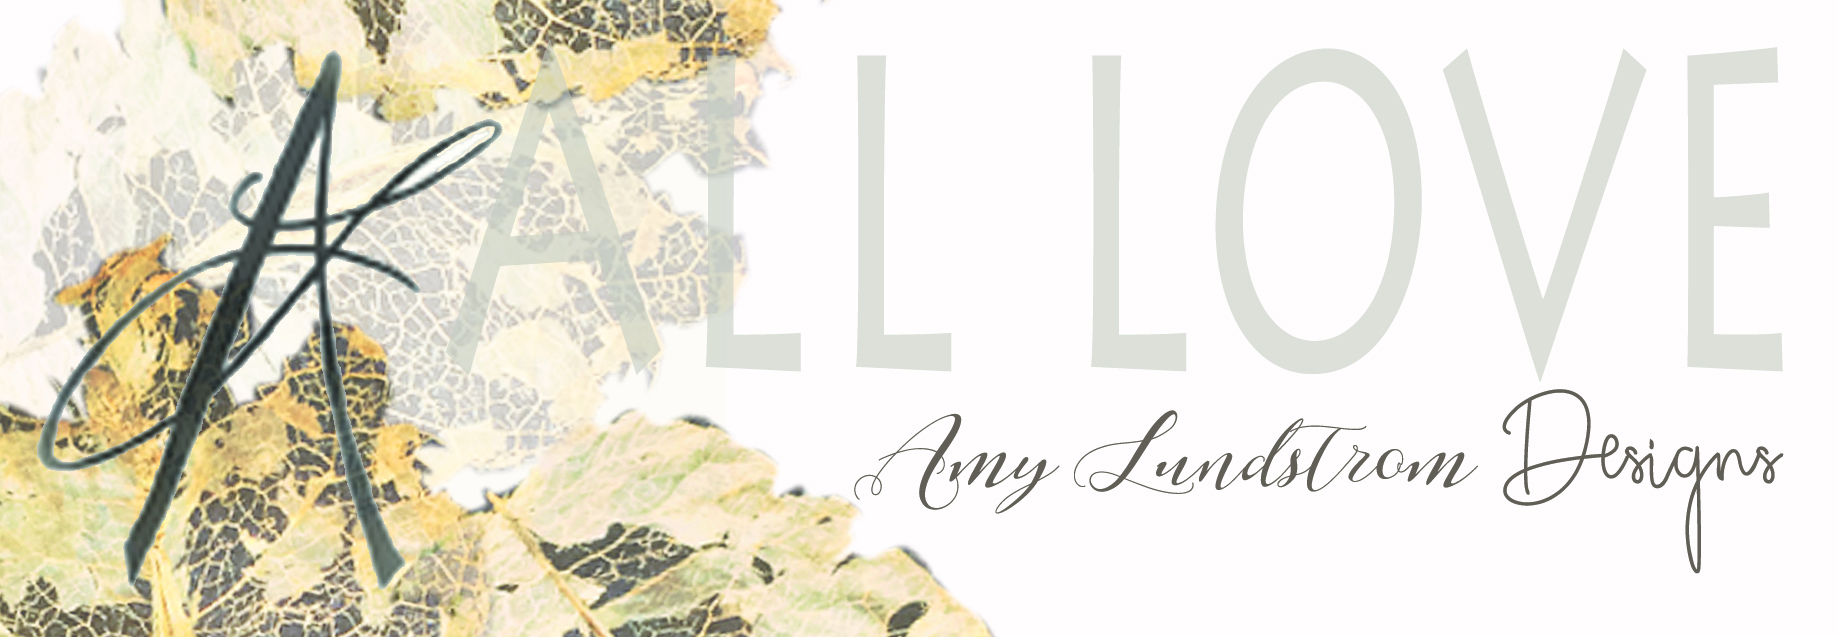 All Love Designs by Amy Lundstrom